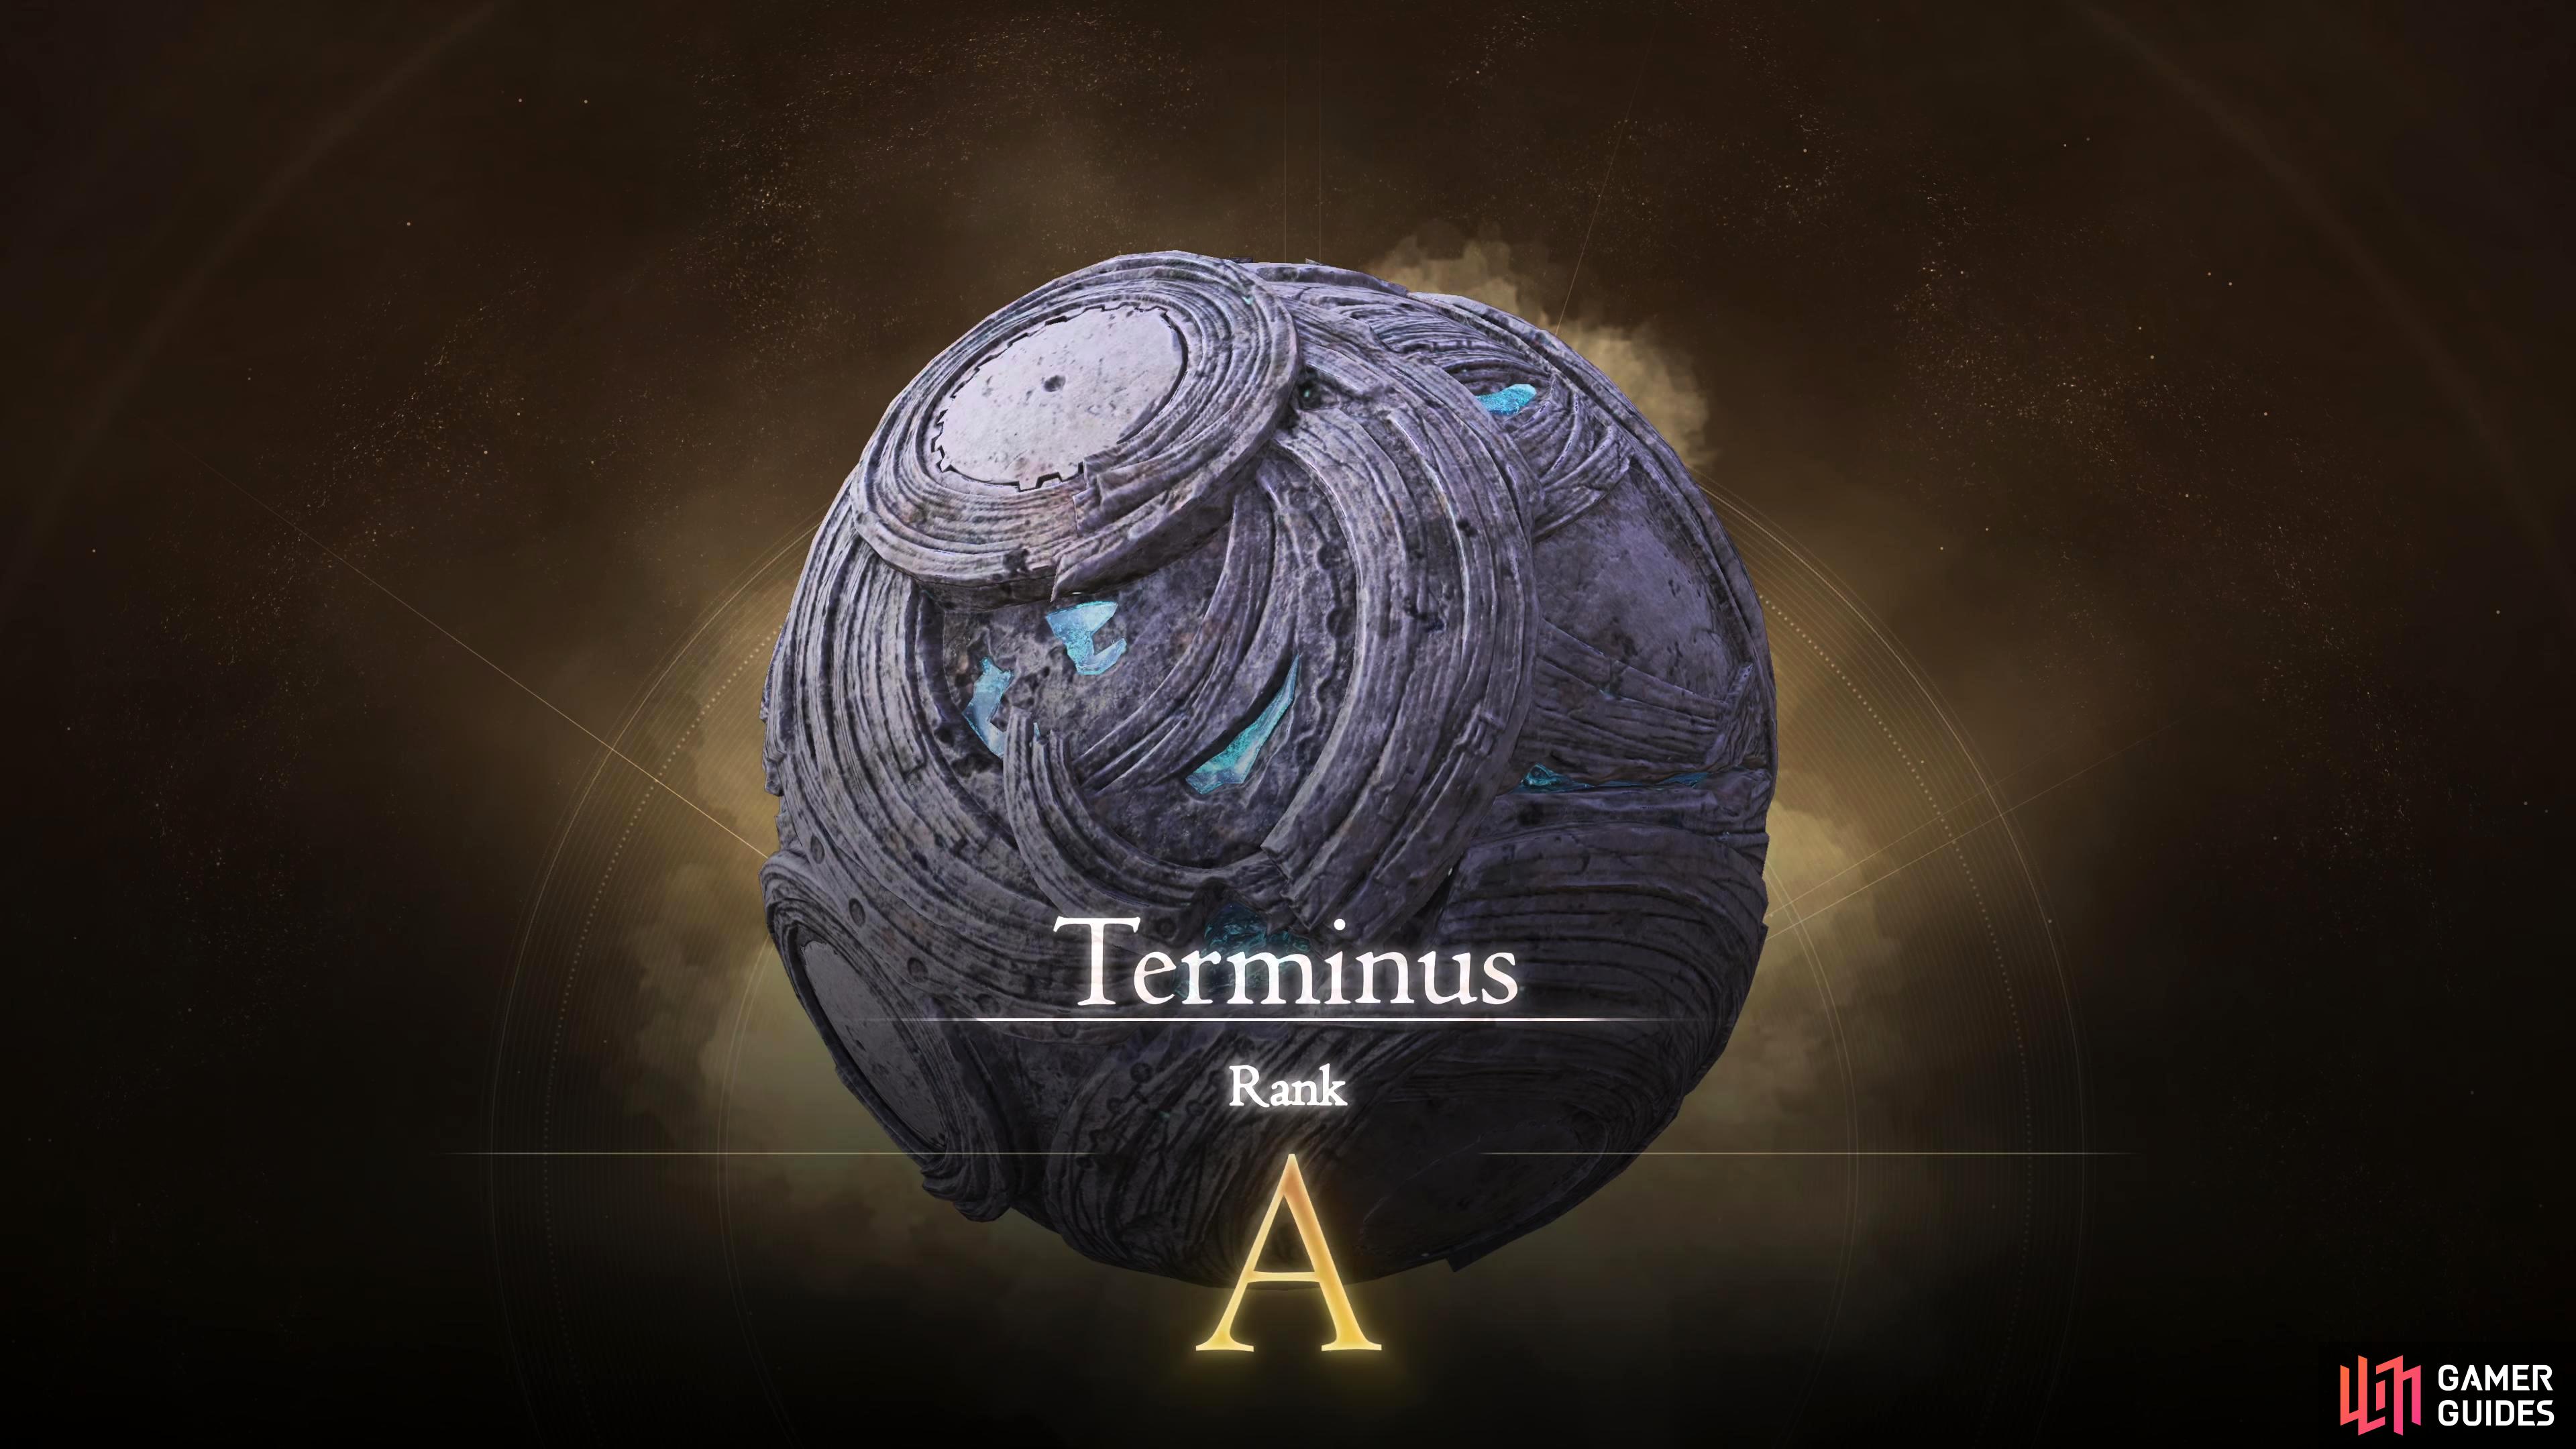 Terminus can be accessed during the Brotherhood main scenario quest.